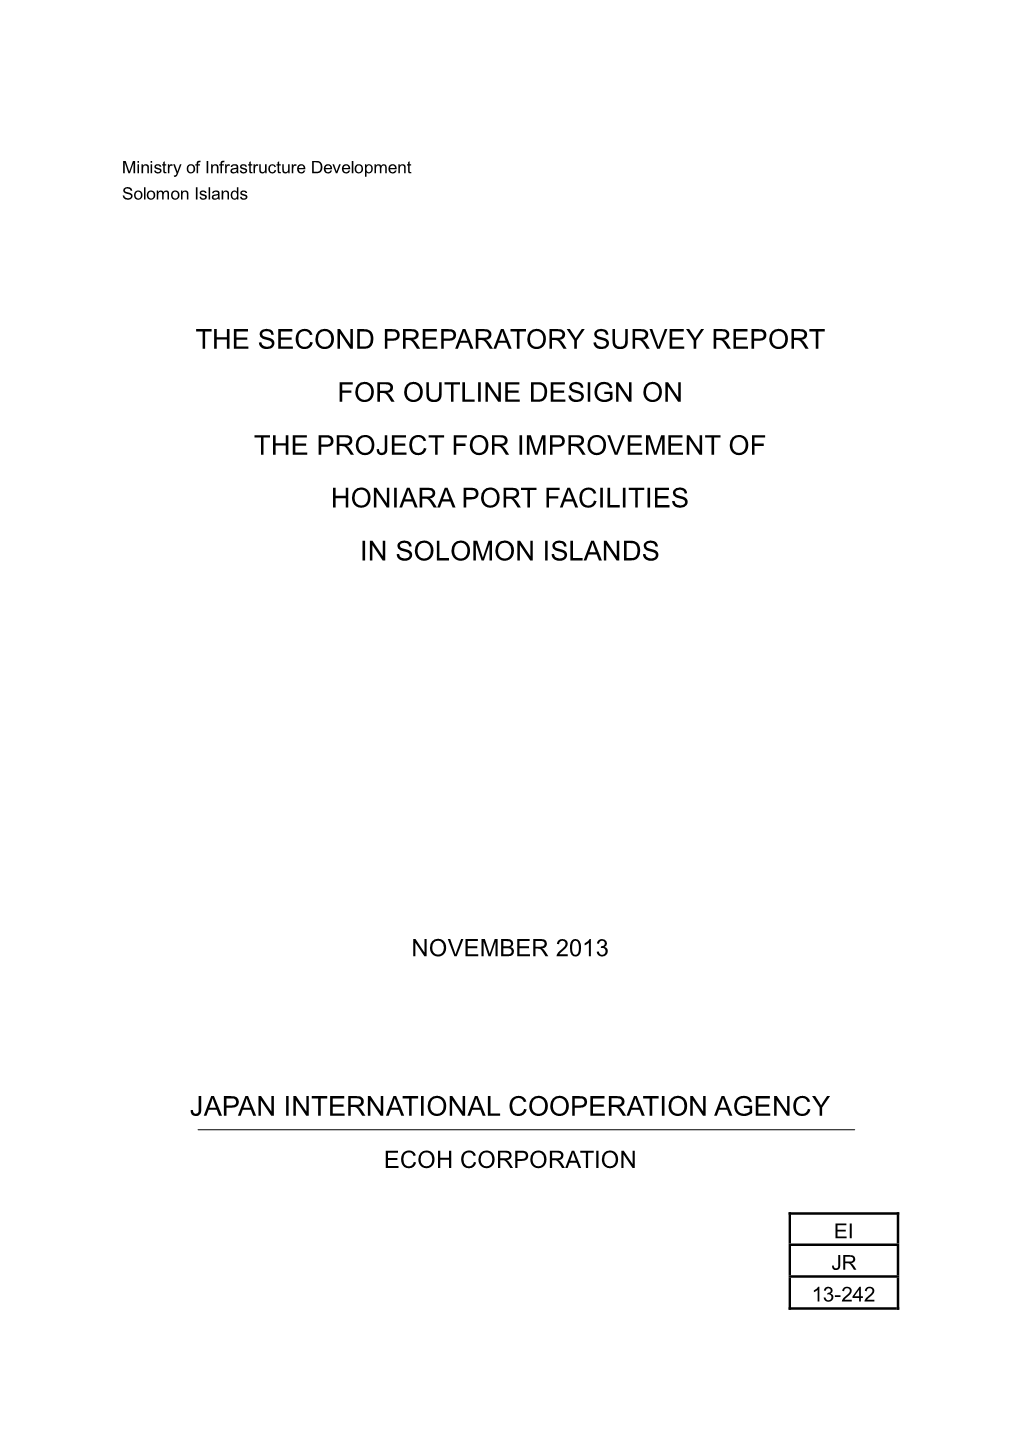 The Second Preparatory Survey Report for Outline Design on the Project for Improvement of Honiara Port Facilities in Solomon Islands